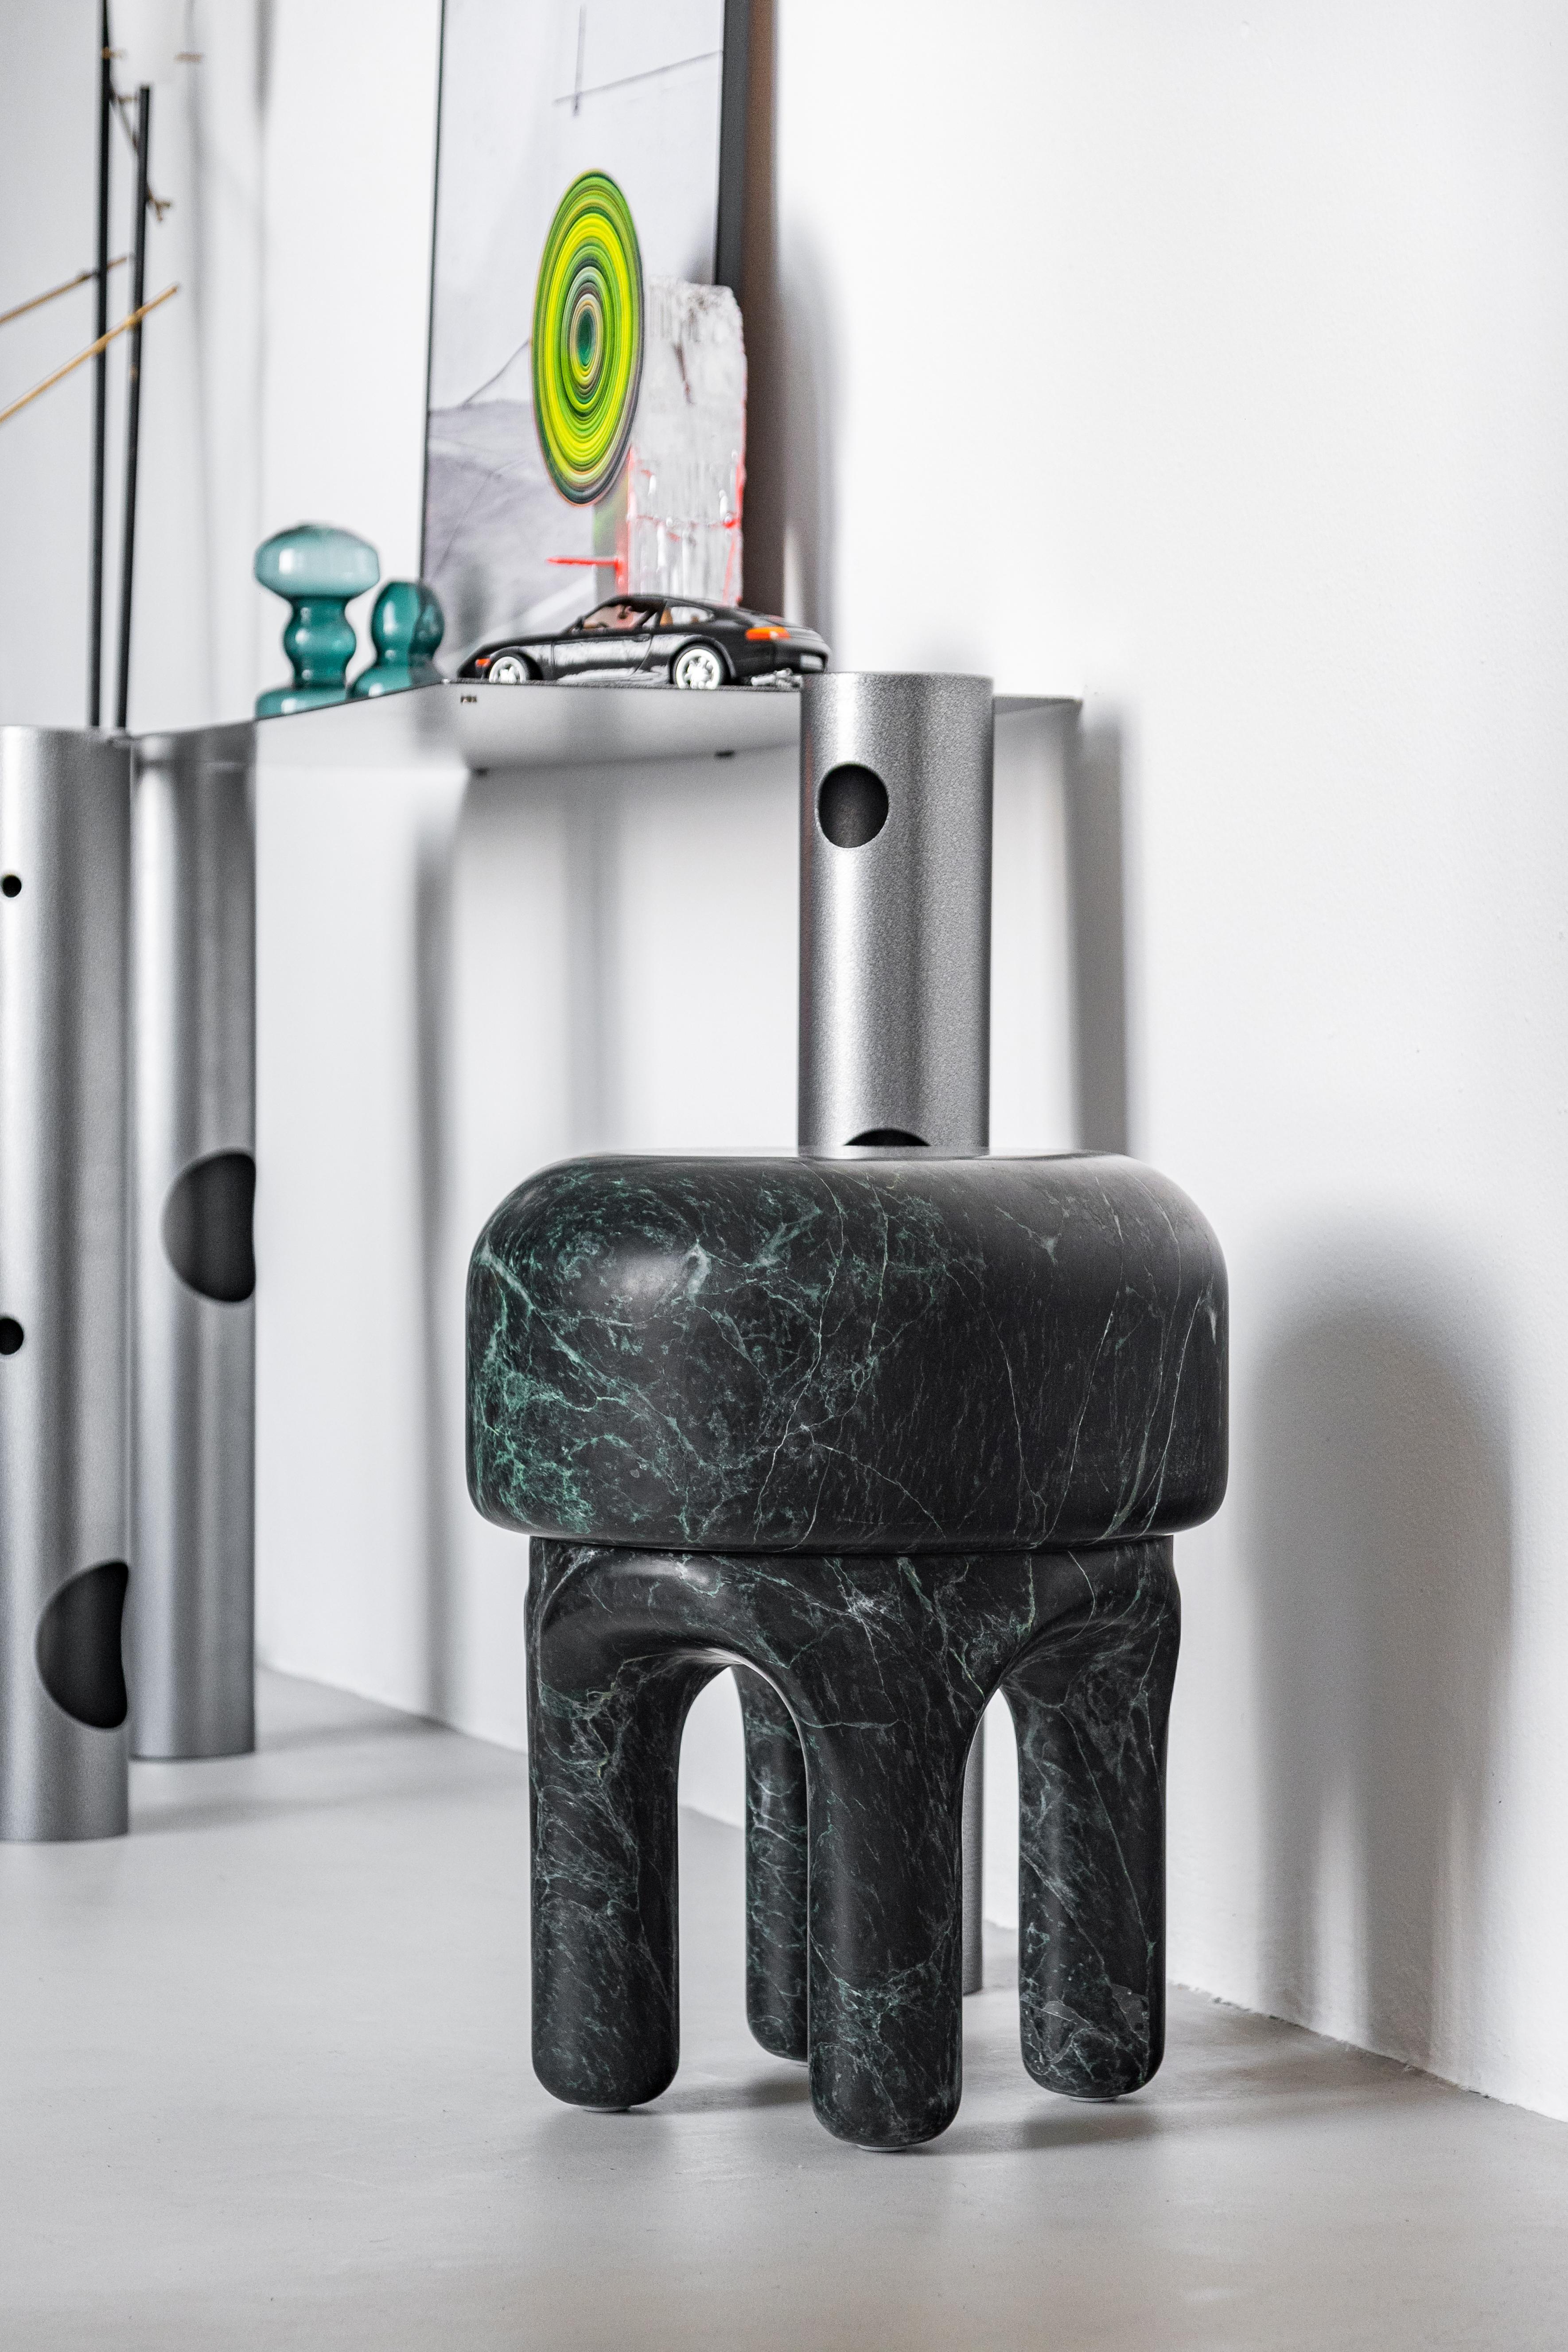 Marble Table - Stool & Sculpture for your living space - Made in Italy 

Past, present and future come together in this sculptural piece by Spinzi. Why you may ask? Because Medusa is shaped after a dream had by designer Tommaso Spinzi right after